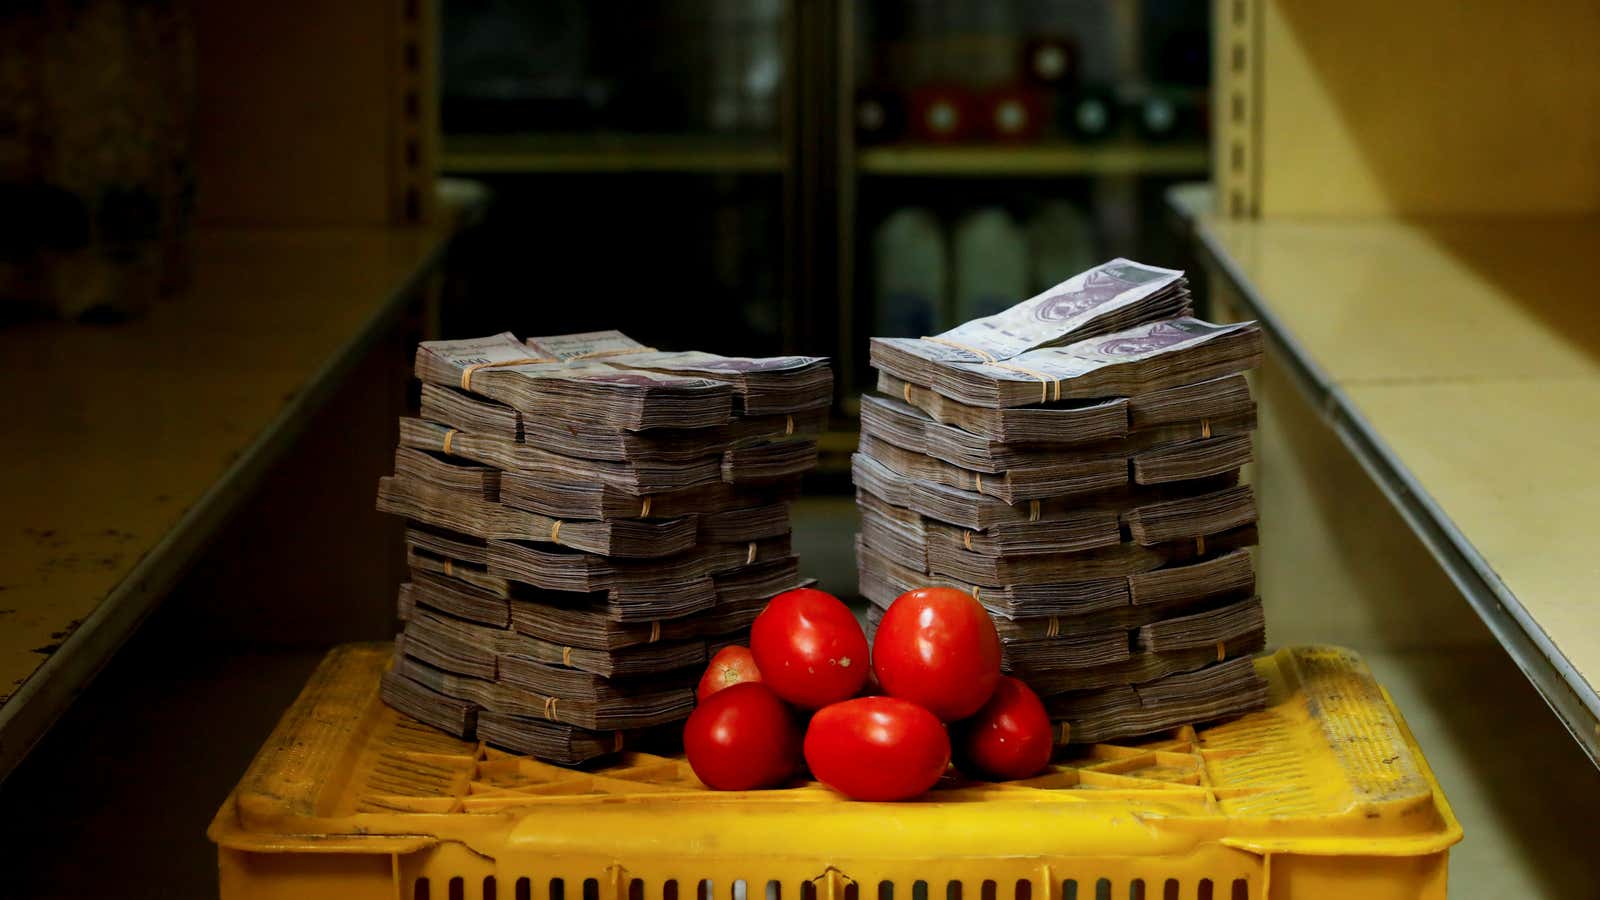 A kilogram of tomatoes cost  5,000,000 bolívares ($0.76) before Aug. 20.